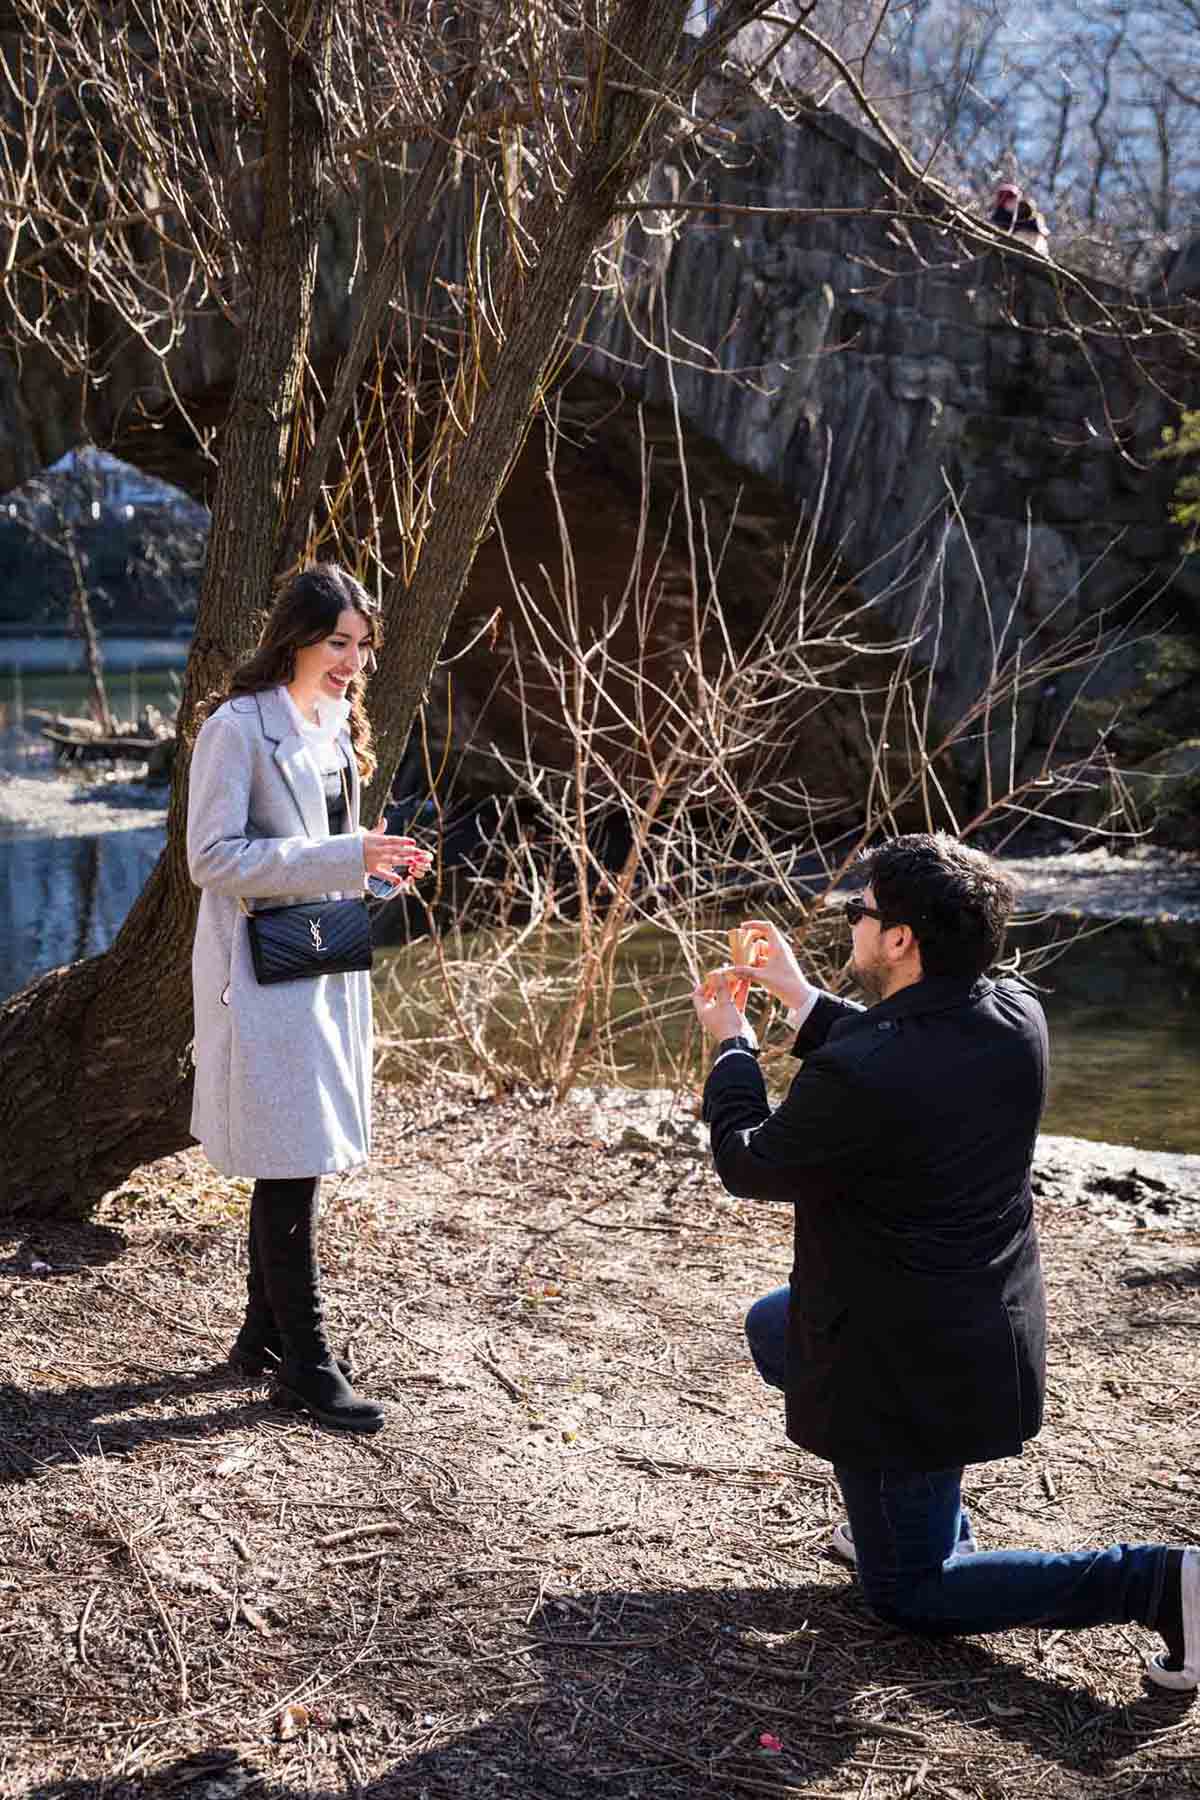 Man on one knee in front of woman during a Gapstow Bridge surprise proposal in Central Park